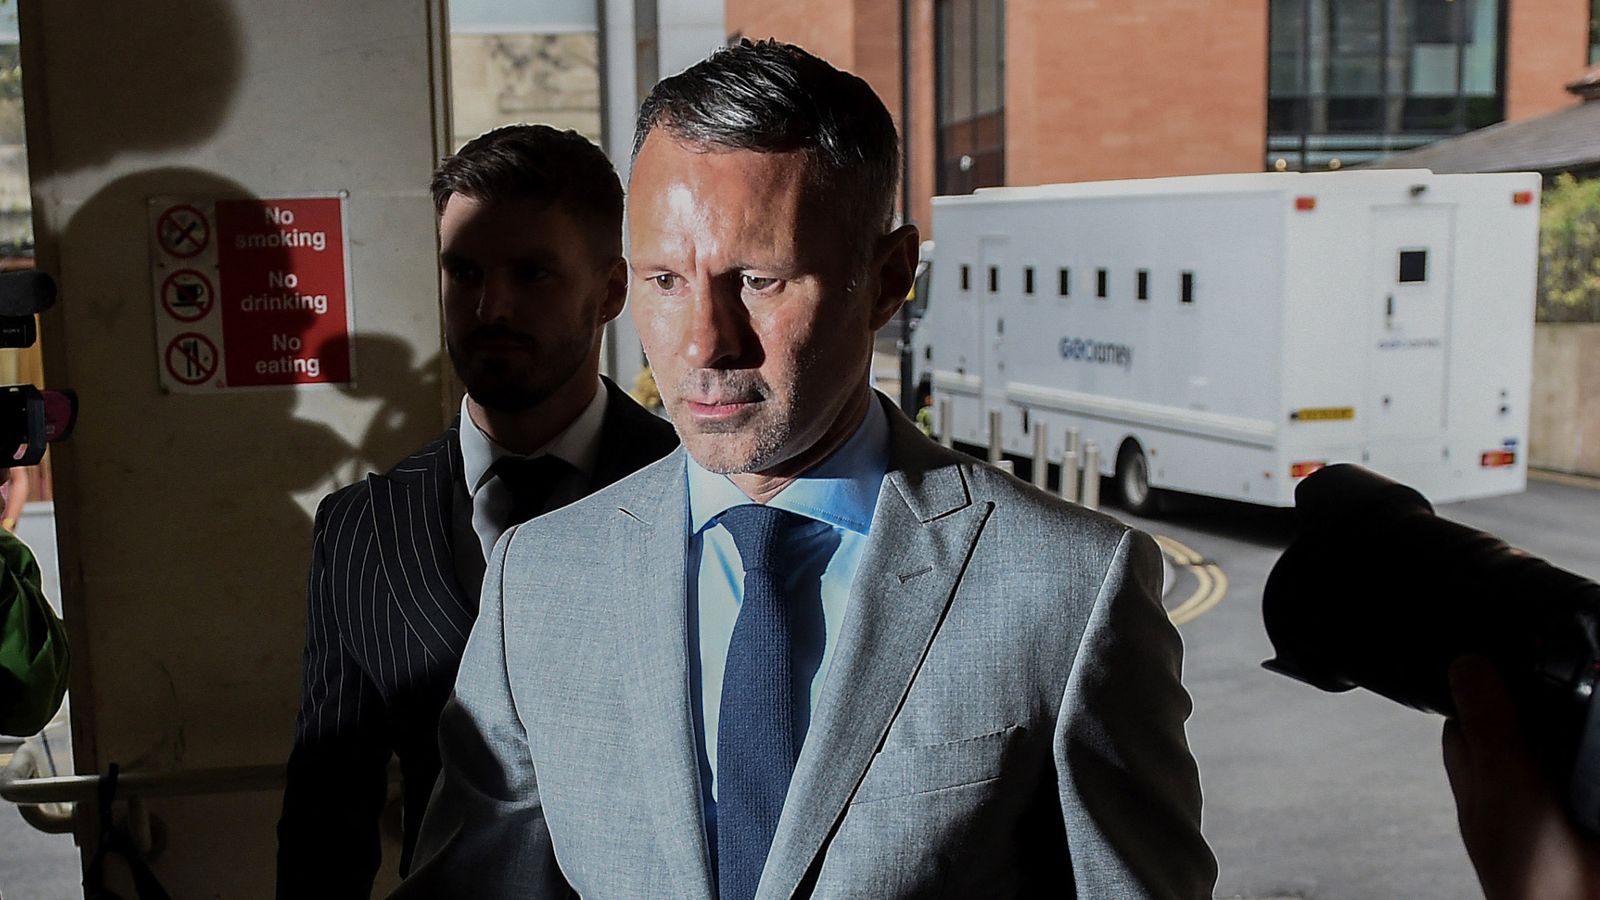 Ryan Giggs trial live: Ex-Manchester United star back in witness box after breaking down in tears